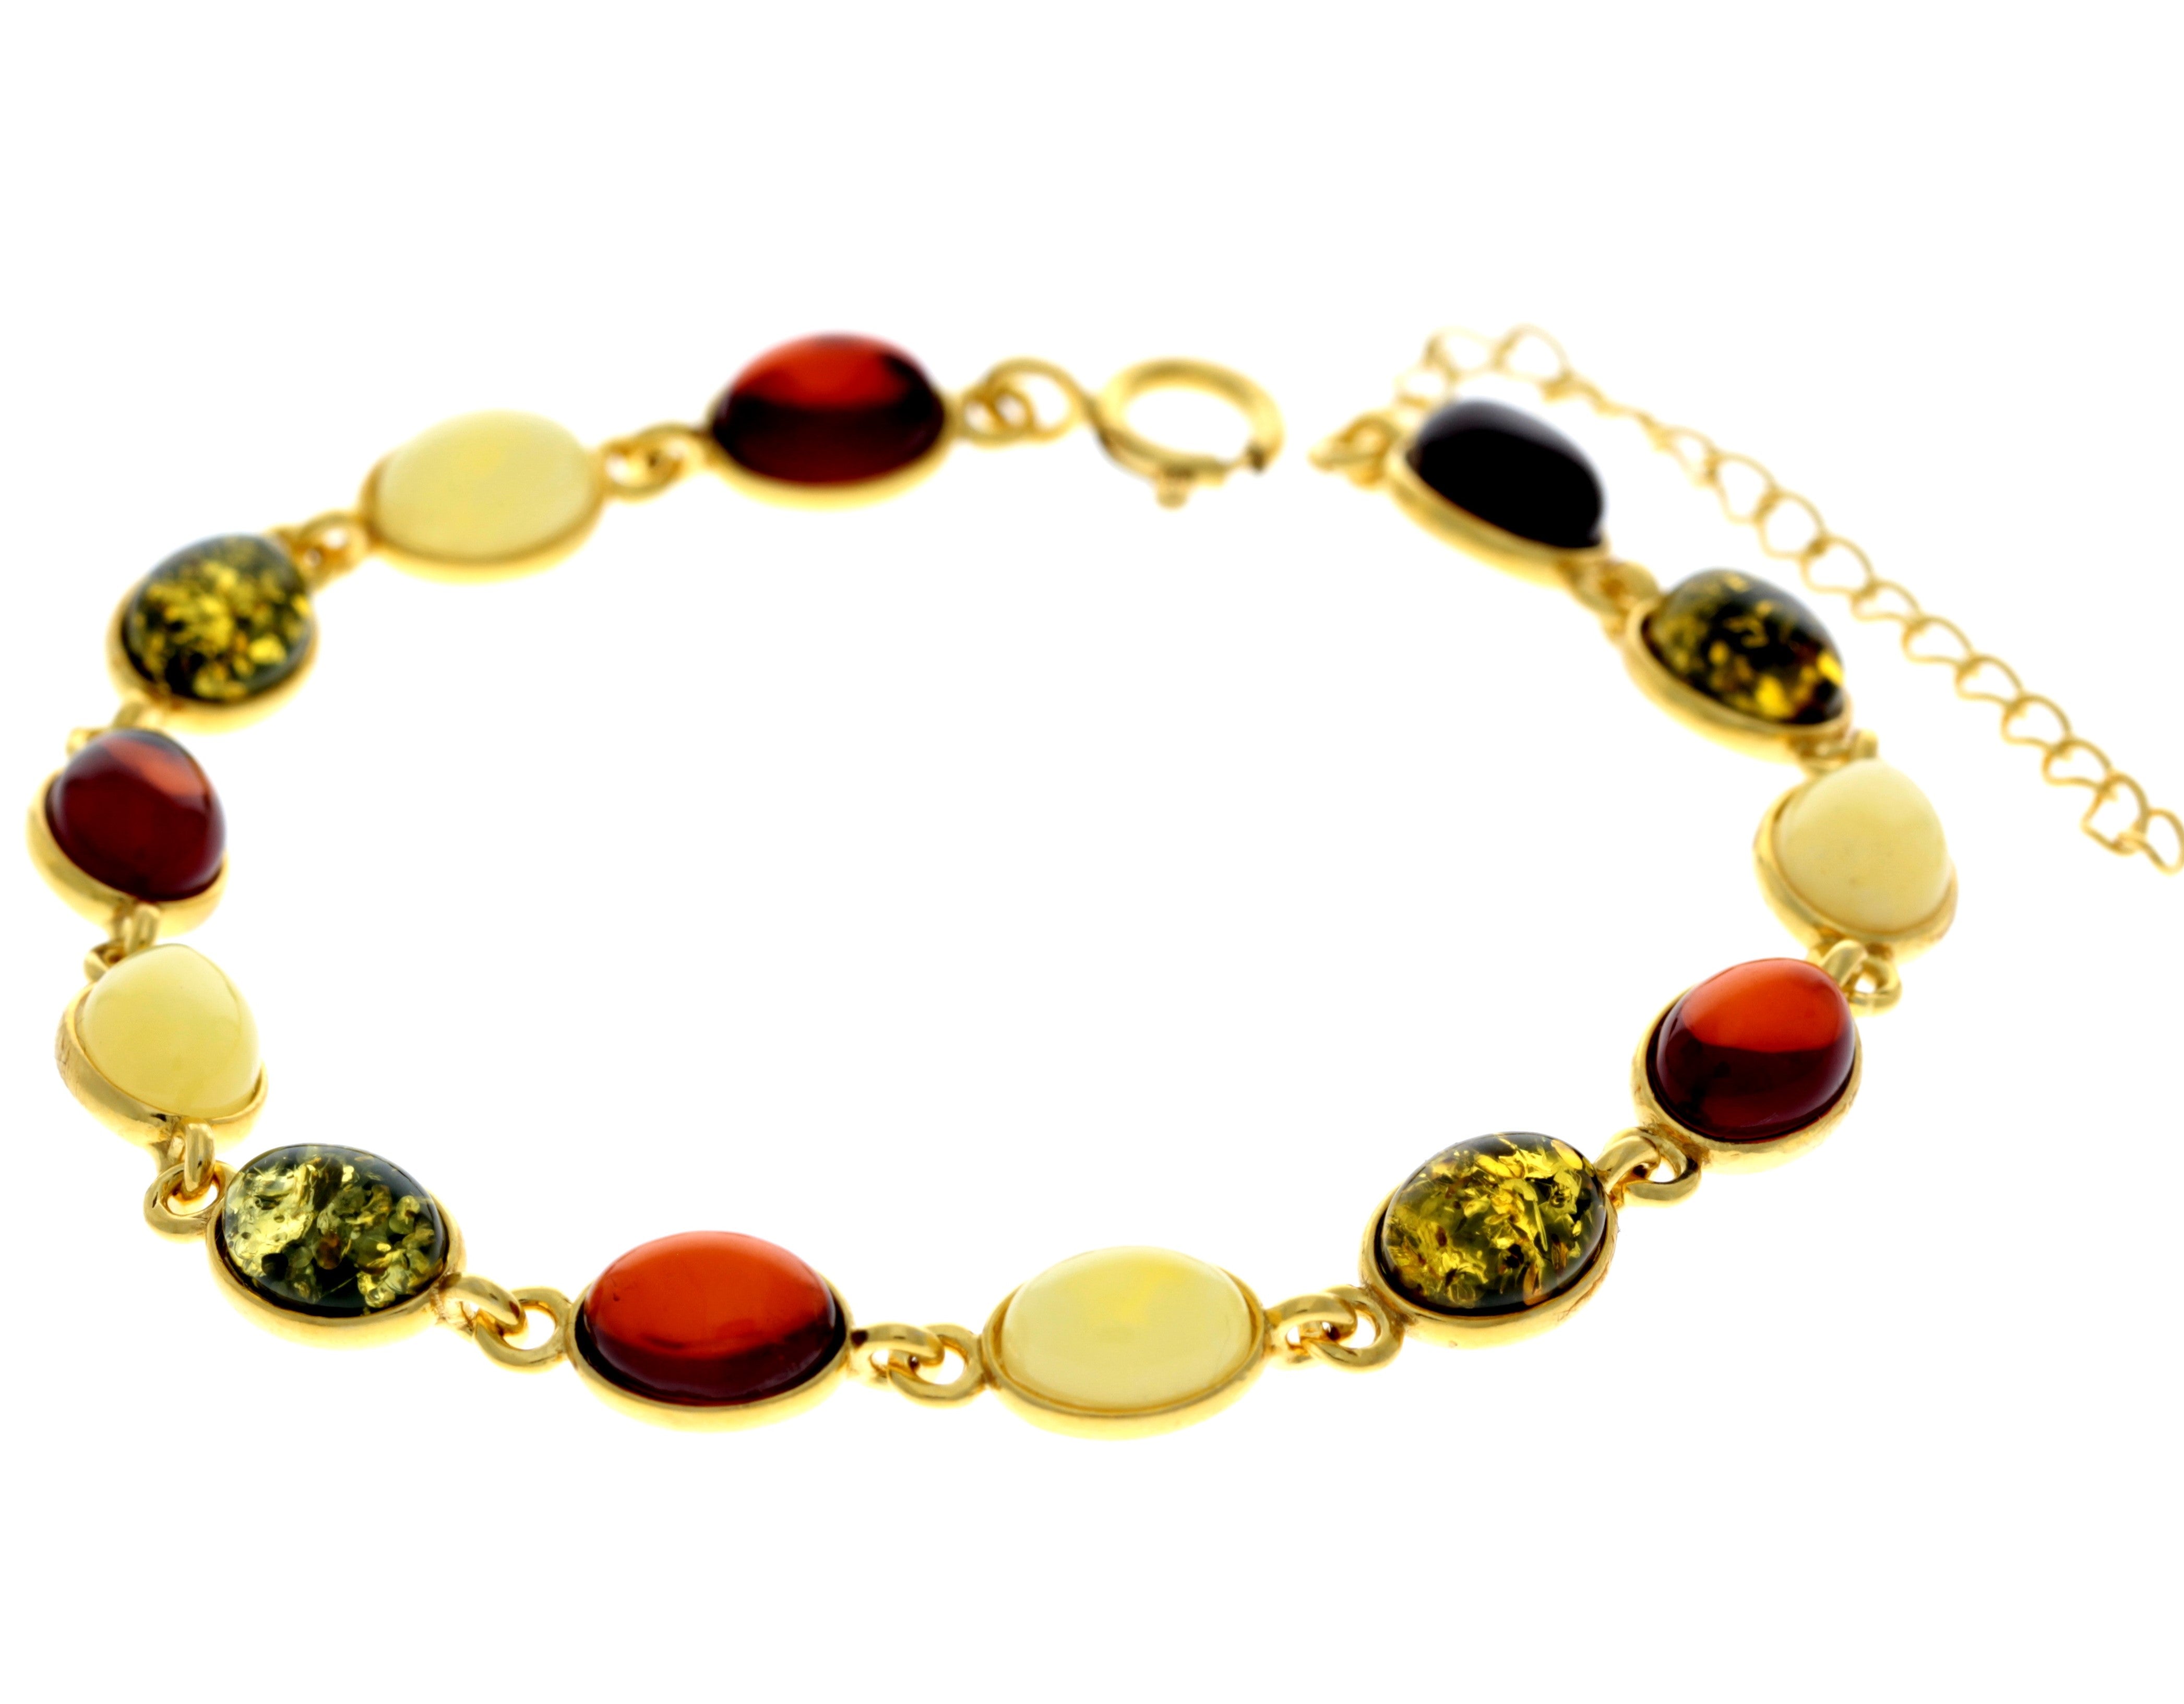 Classic 925 Sterling Silver Gold Plated with 22 Carat Gold 19 cm + 4.5 cm Link Bracelet set with Genuine Baltic Amber Gemstones - MG501